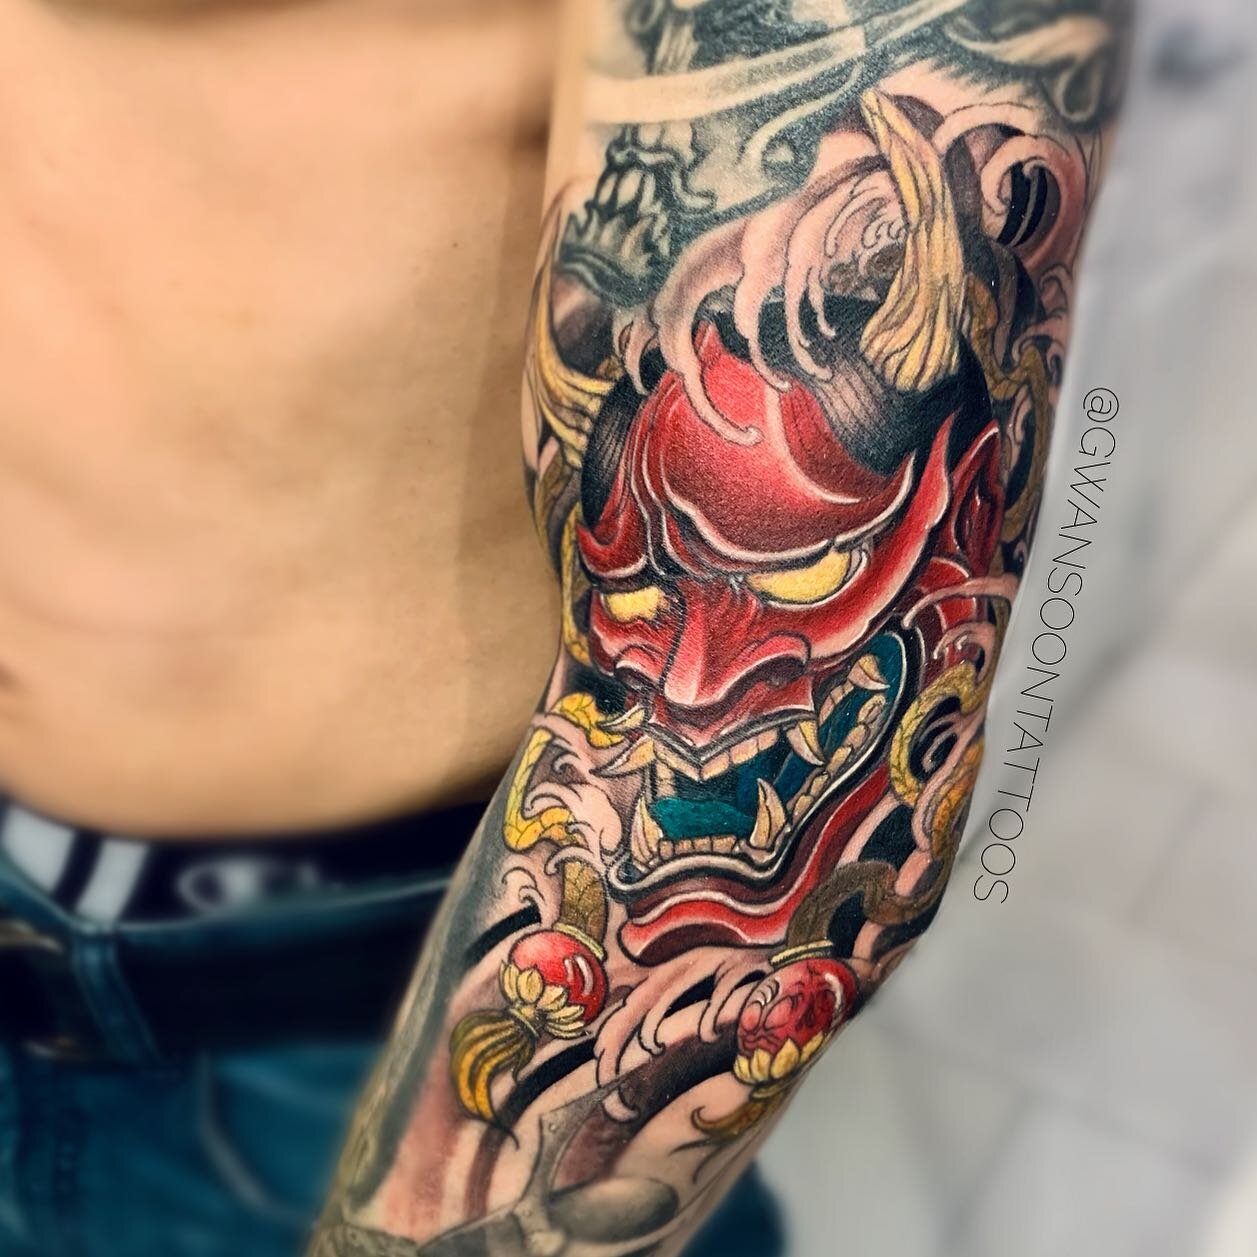 Oni mask tattoo design to complete Adane&rsquo;s sleeve 👹 Parts healed and fresh. Thanks Adane! _________________________________________________ 

Follow us @gwansoontattoos ✍🏼

Artist - @jina.gwansoontattoos
______________________________________